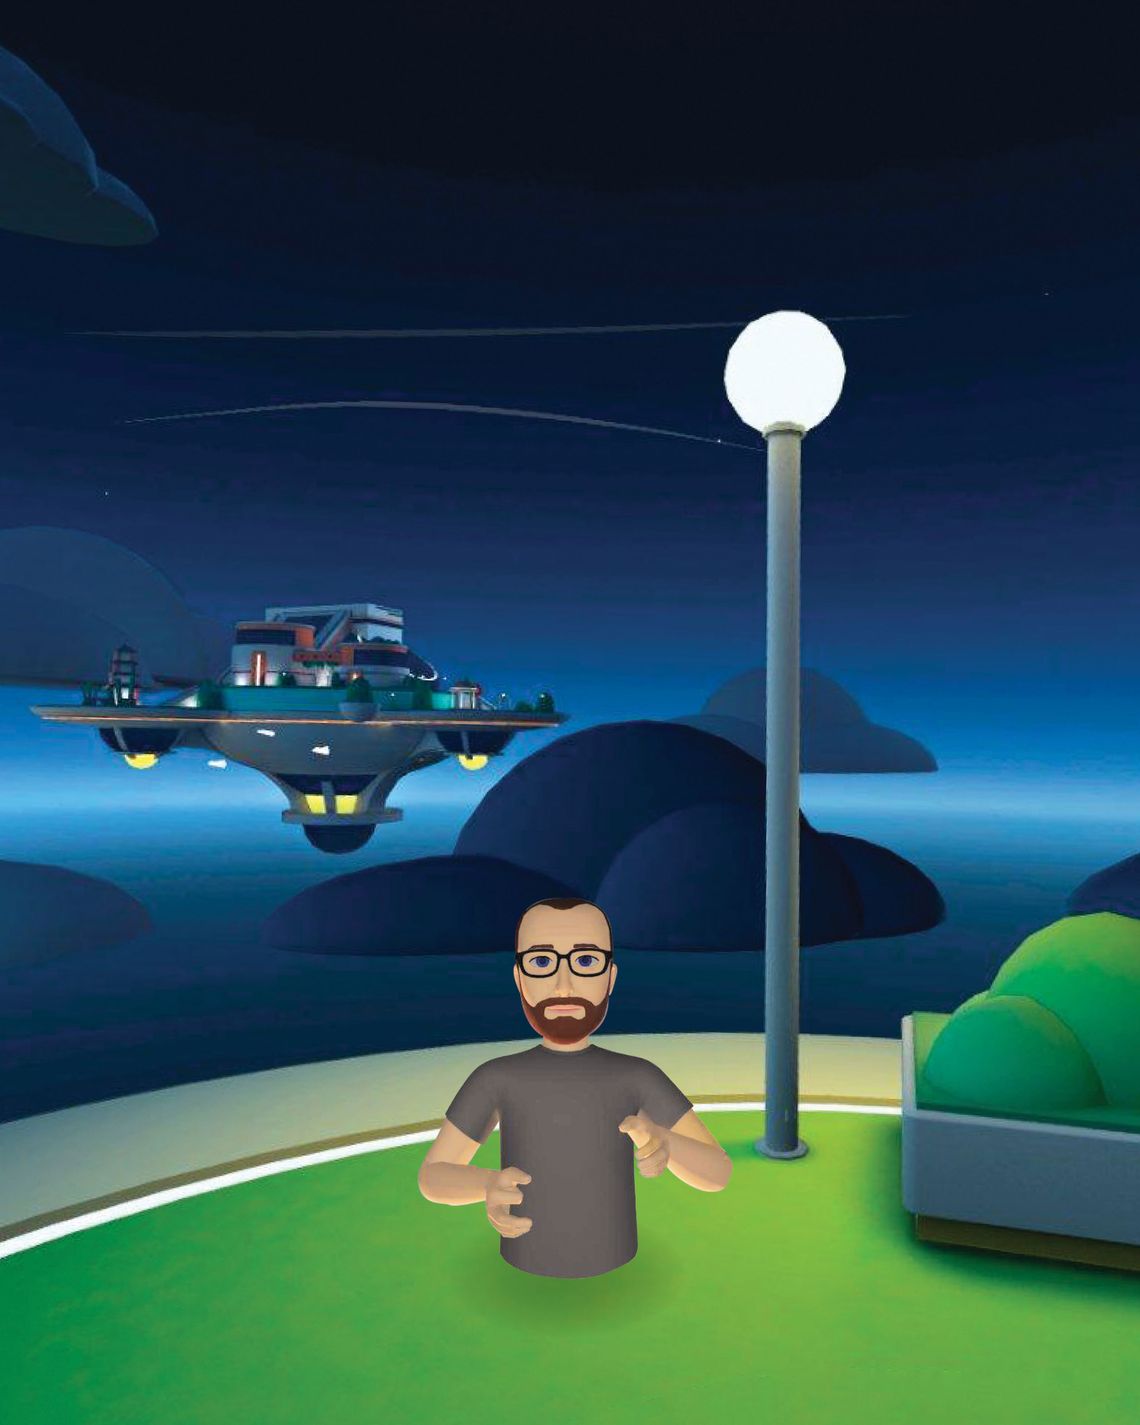 Searching for Friends in Mark Zuckerbergs Metaverse pic